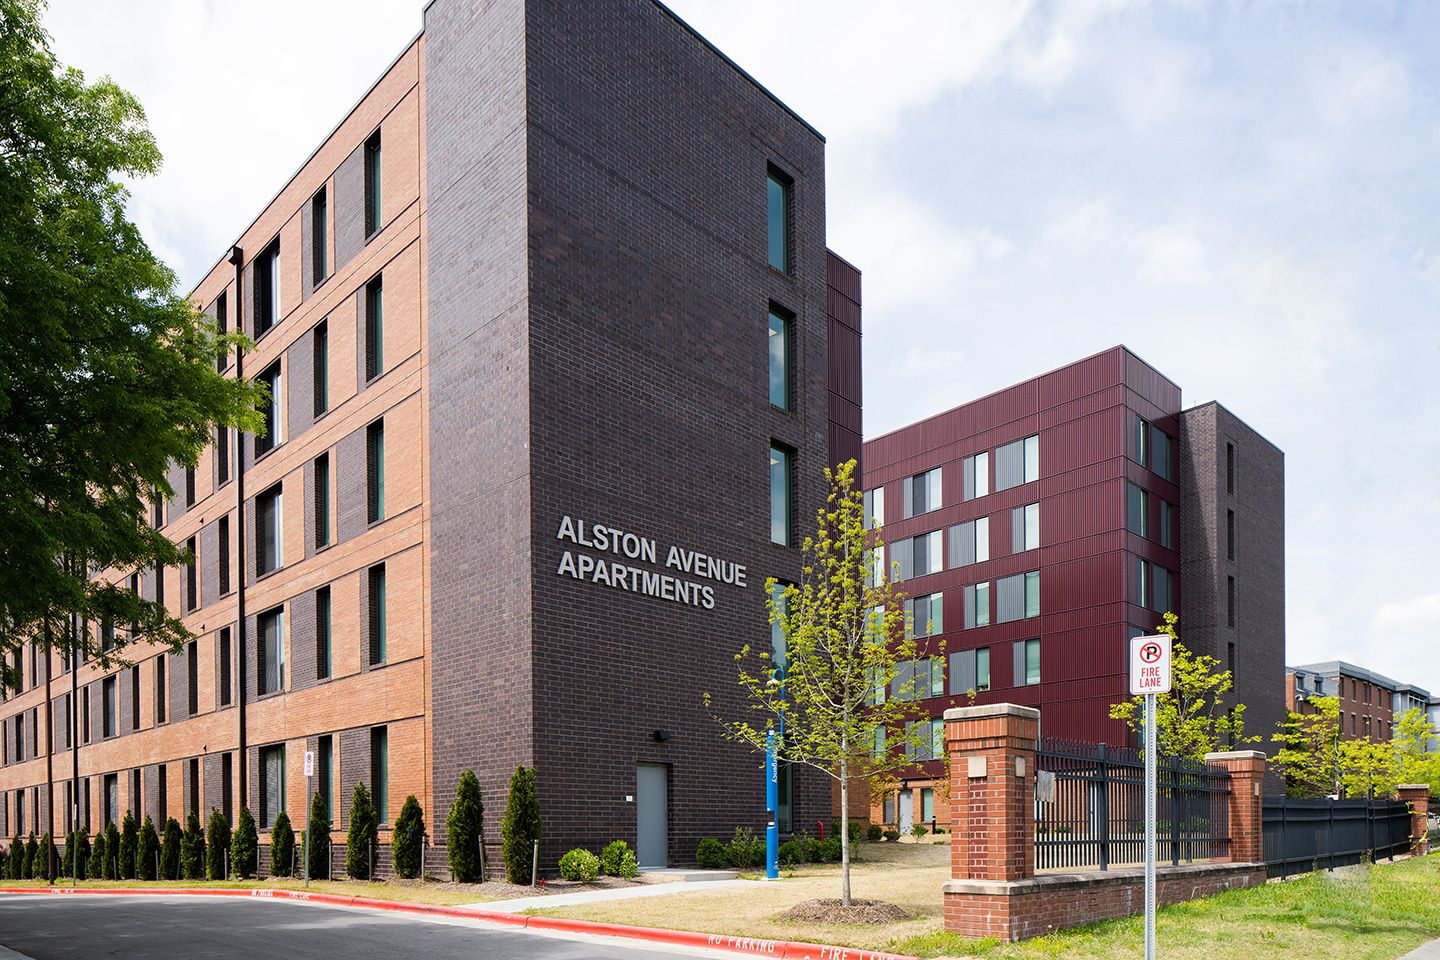 The new on-campus student housing is called the Alston Avenue Apartments.